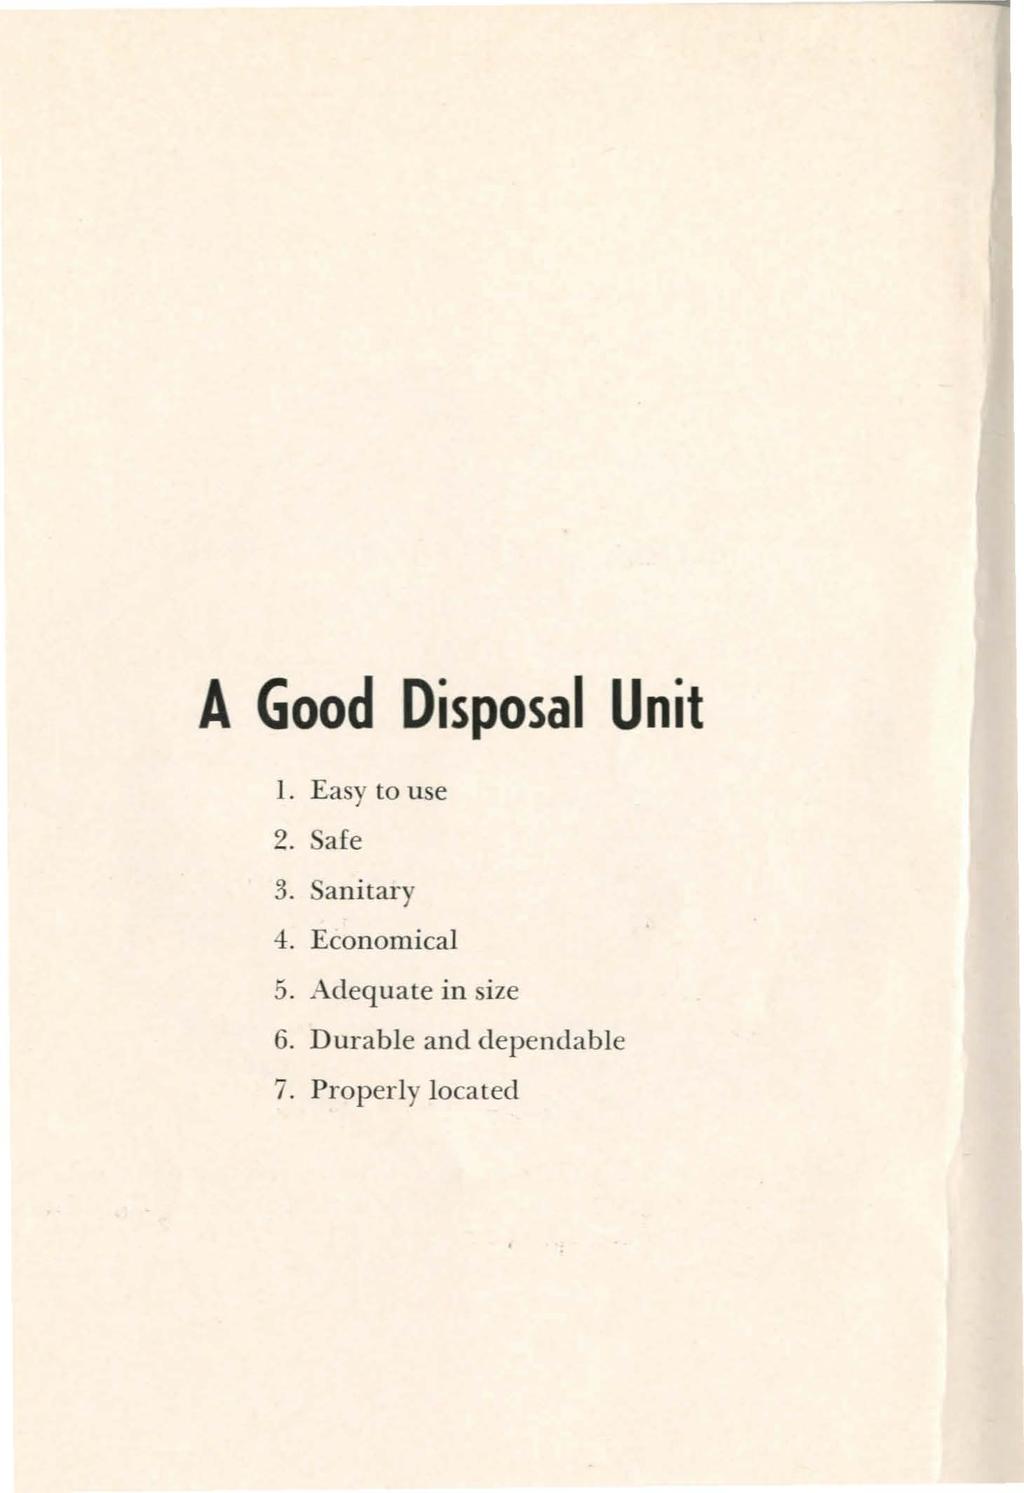 A Good Disposal Unit l. Easy to use 2. afe 3. Sanitary 4.